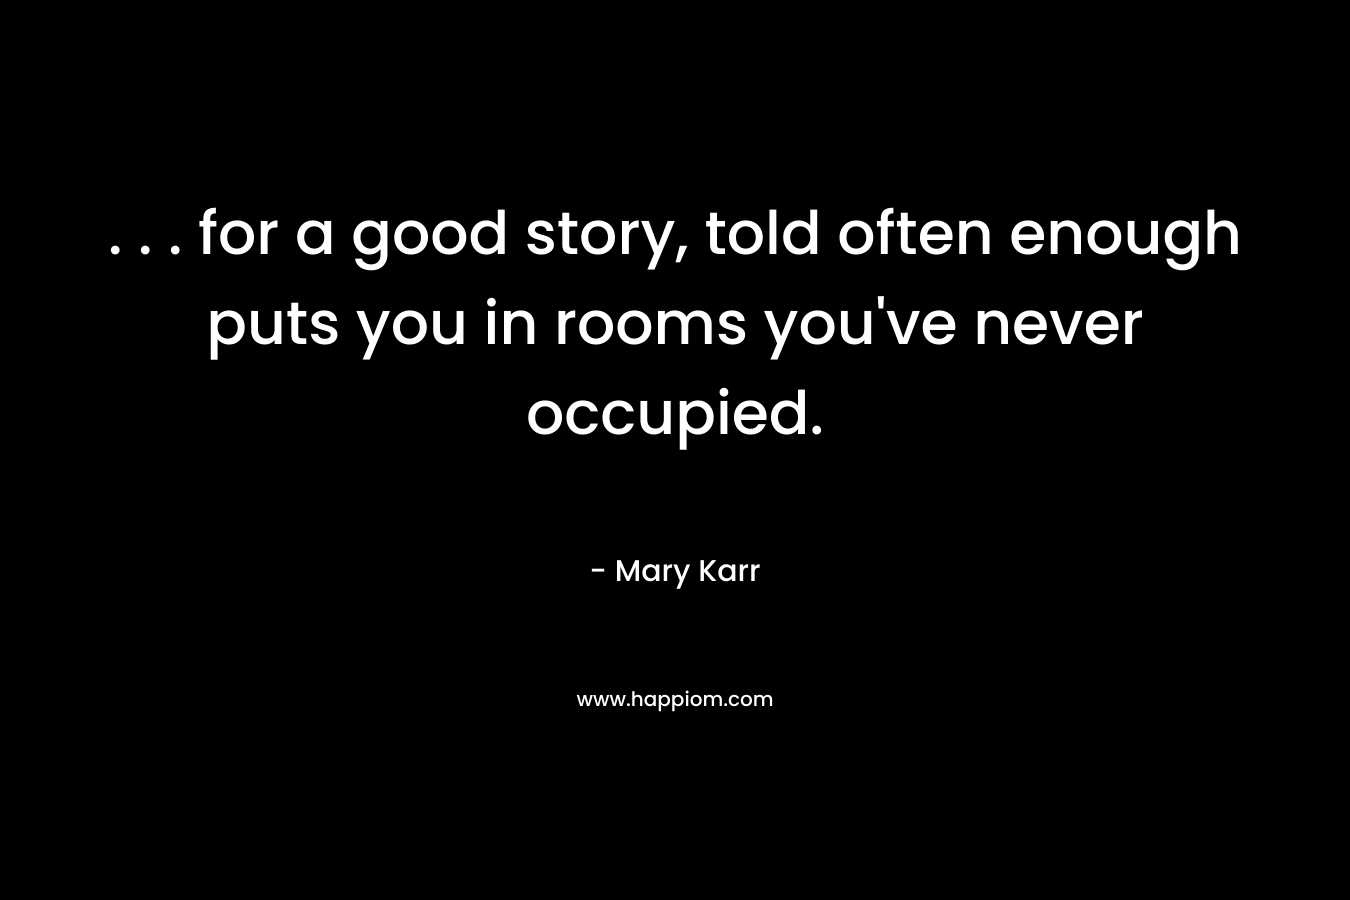 . . . for a good story, told often enough puts you in rooms you’ve never occupied. – Mary Karr